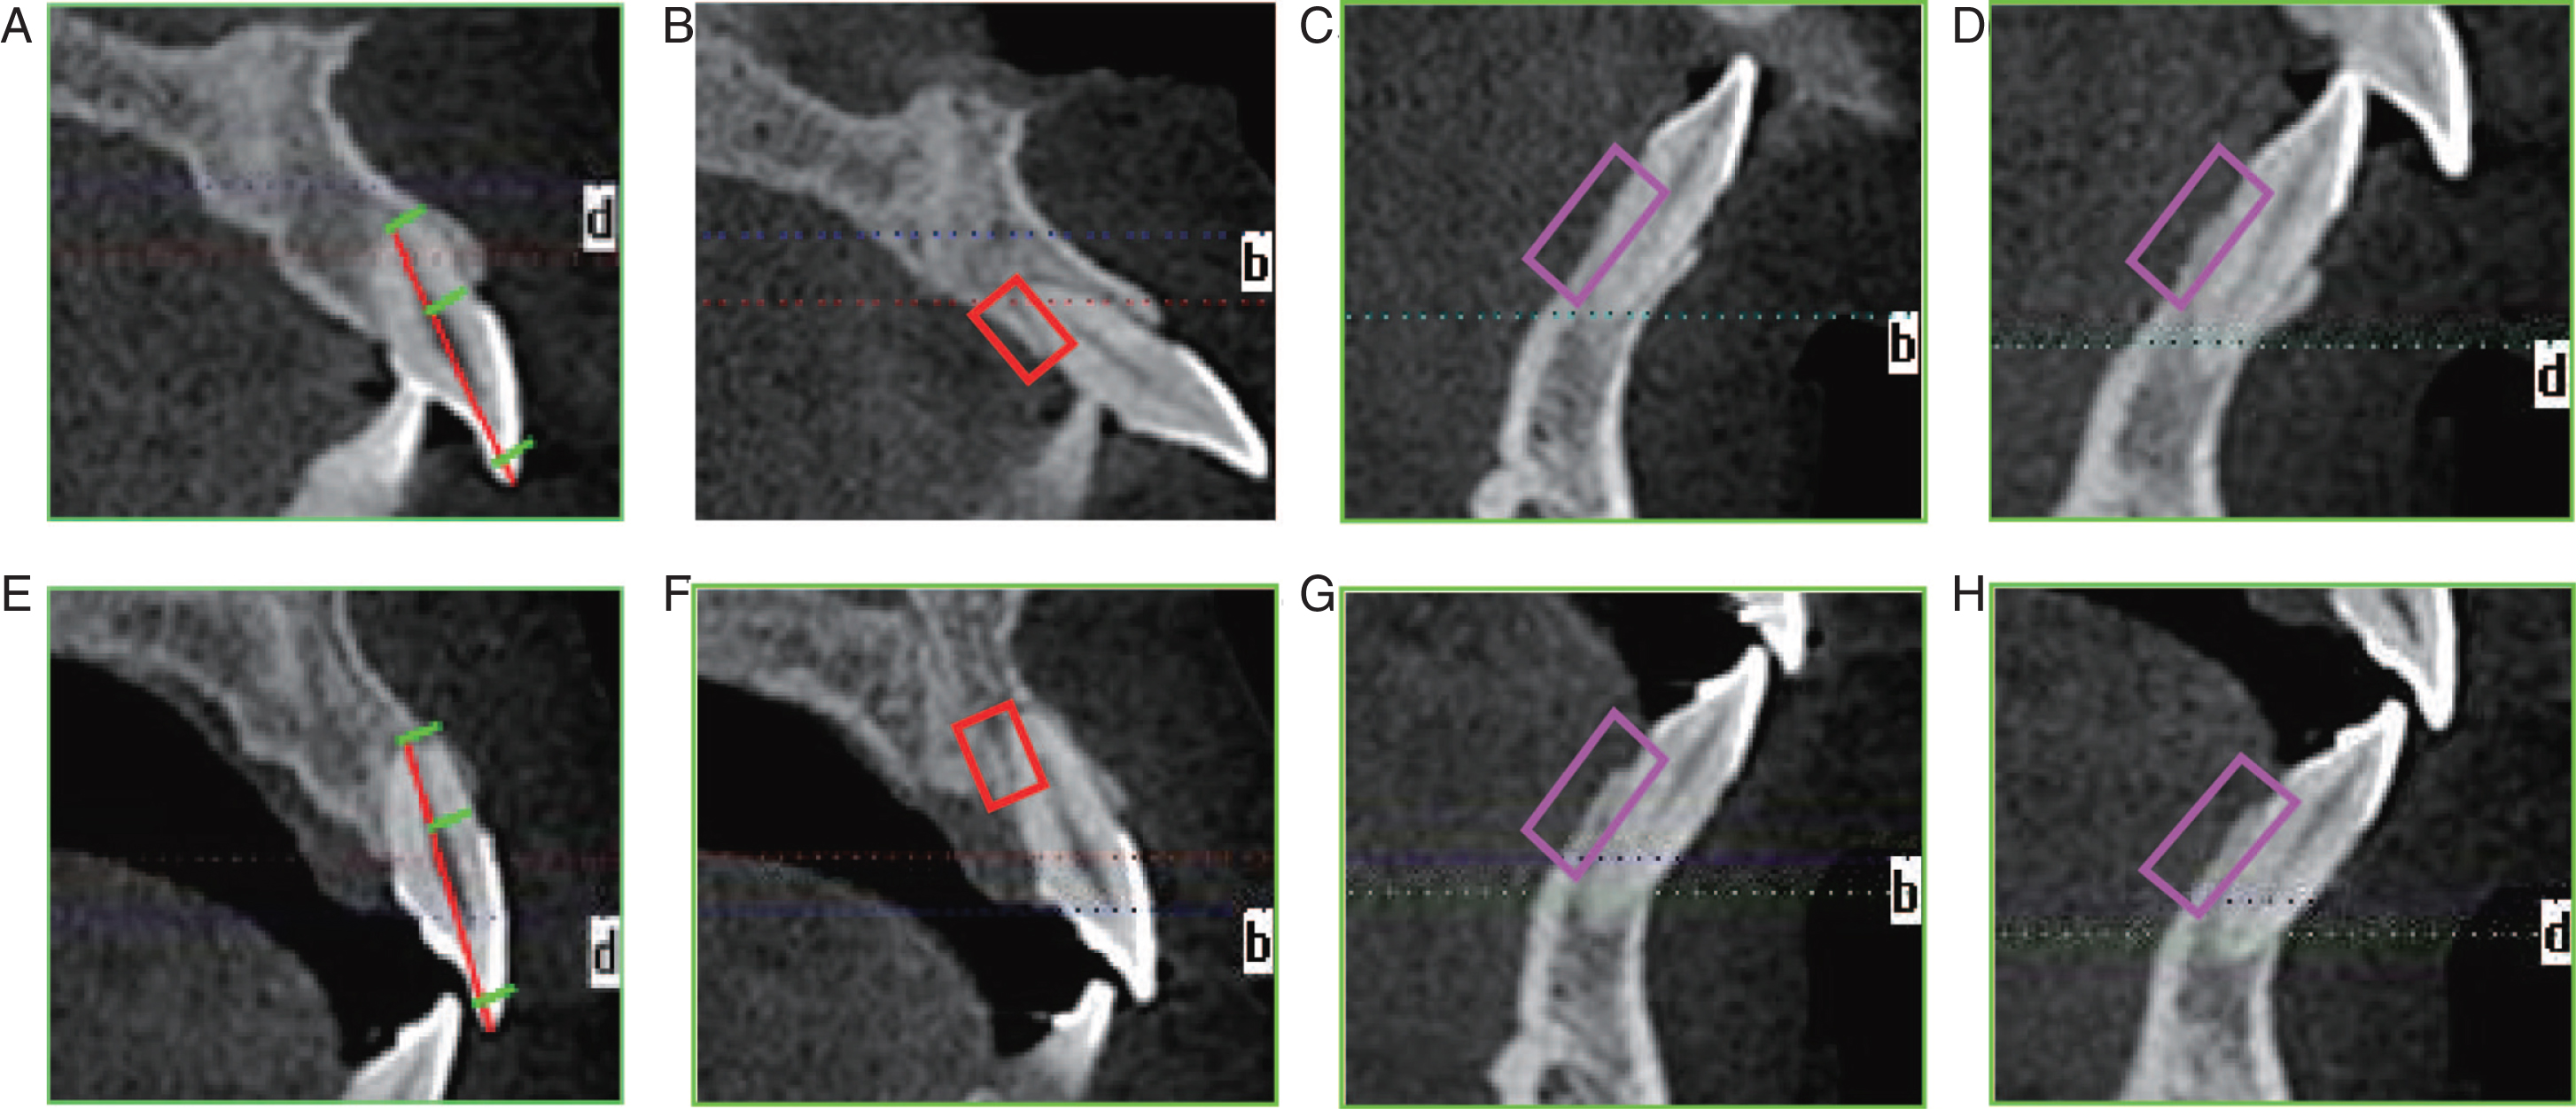 Changes of the anterior region of the maxillary and mandibular teeth. A,B,C,D: static CBCT images of the maxillary right central incisor, maxillary left central incisor, mandibular right central incisor, mandibular left central incisor before treatment; E,F,G,H: static CBCT images of the maxillary right central incisor, maxillary left central incisor, mandibular right central incisor, mandibular left central incisor after treatment; These images showed that no further root absorption was seen in the maxillary right central incisor when the treatment was finished, and the lingual alveolar bone height and thickness was obviously increased in maxillary left central incisor, mandibular right central incisor and mandibular left central incisor.